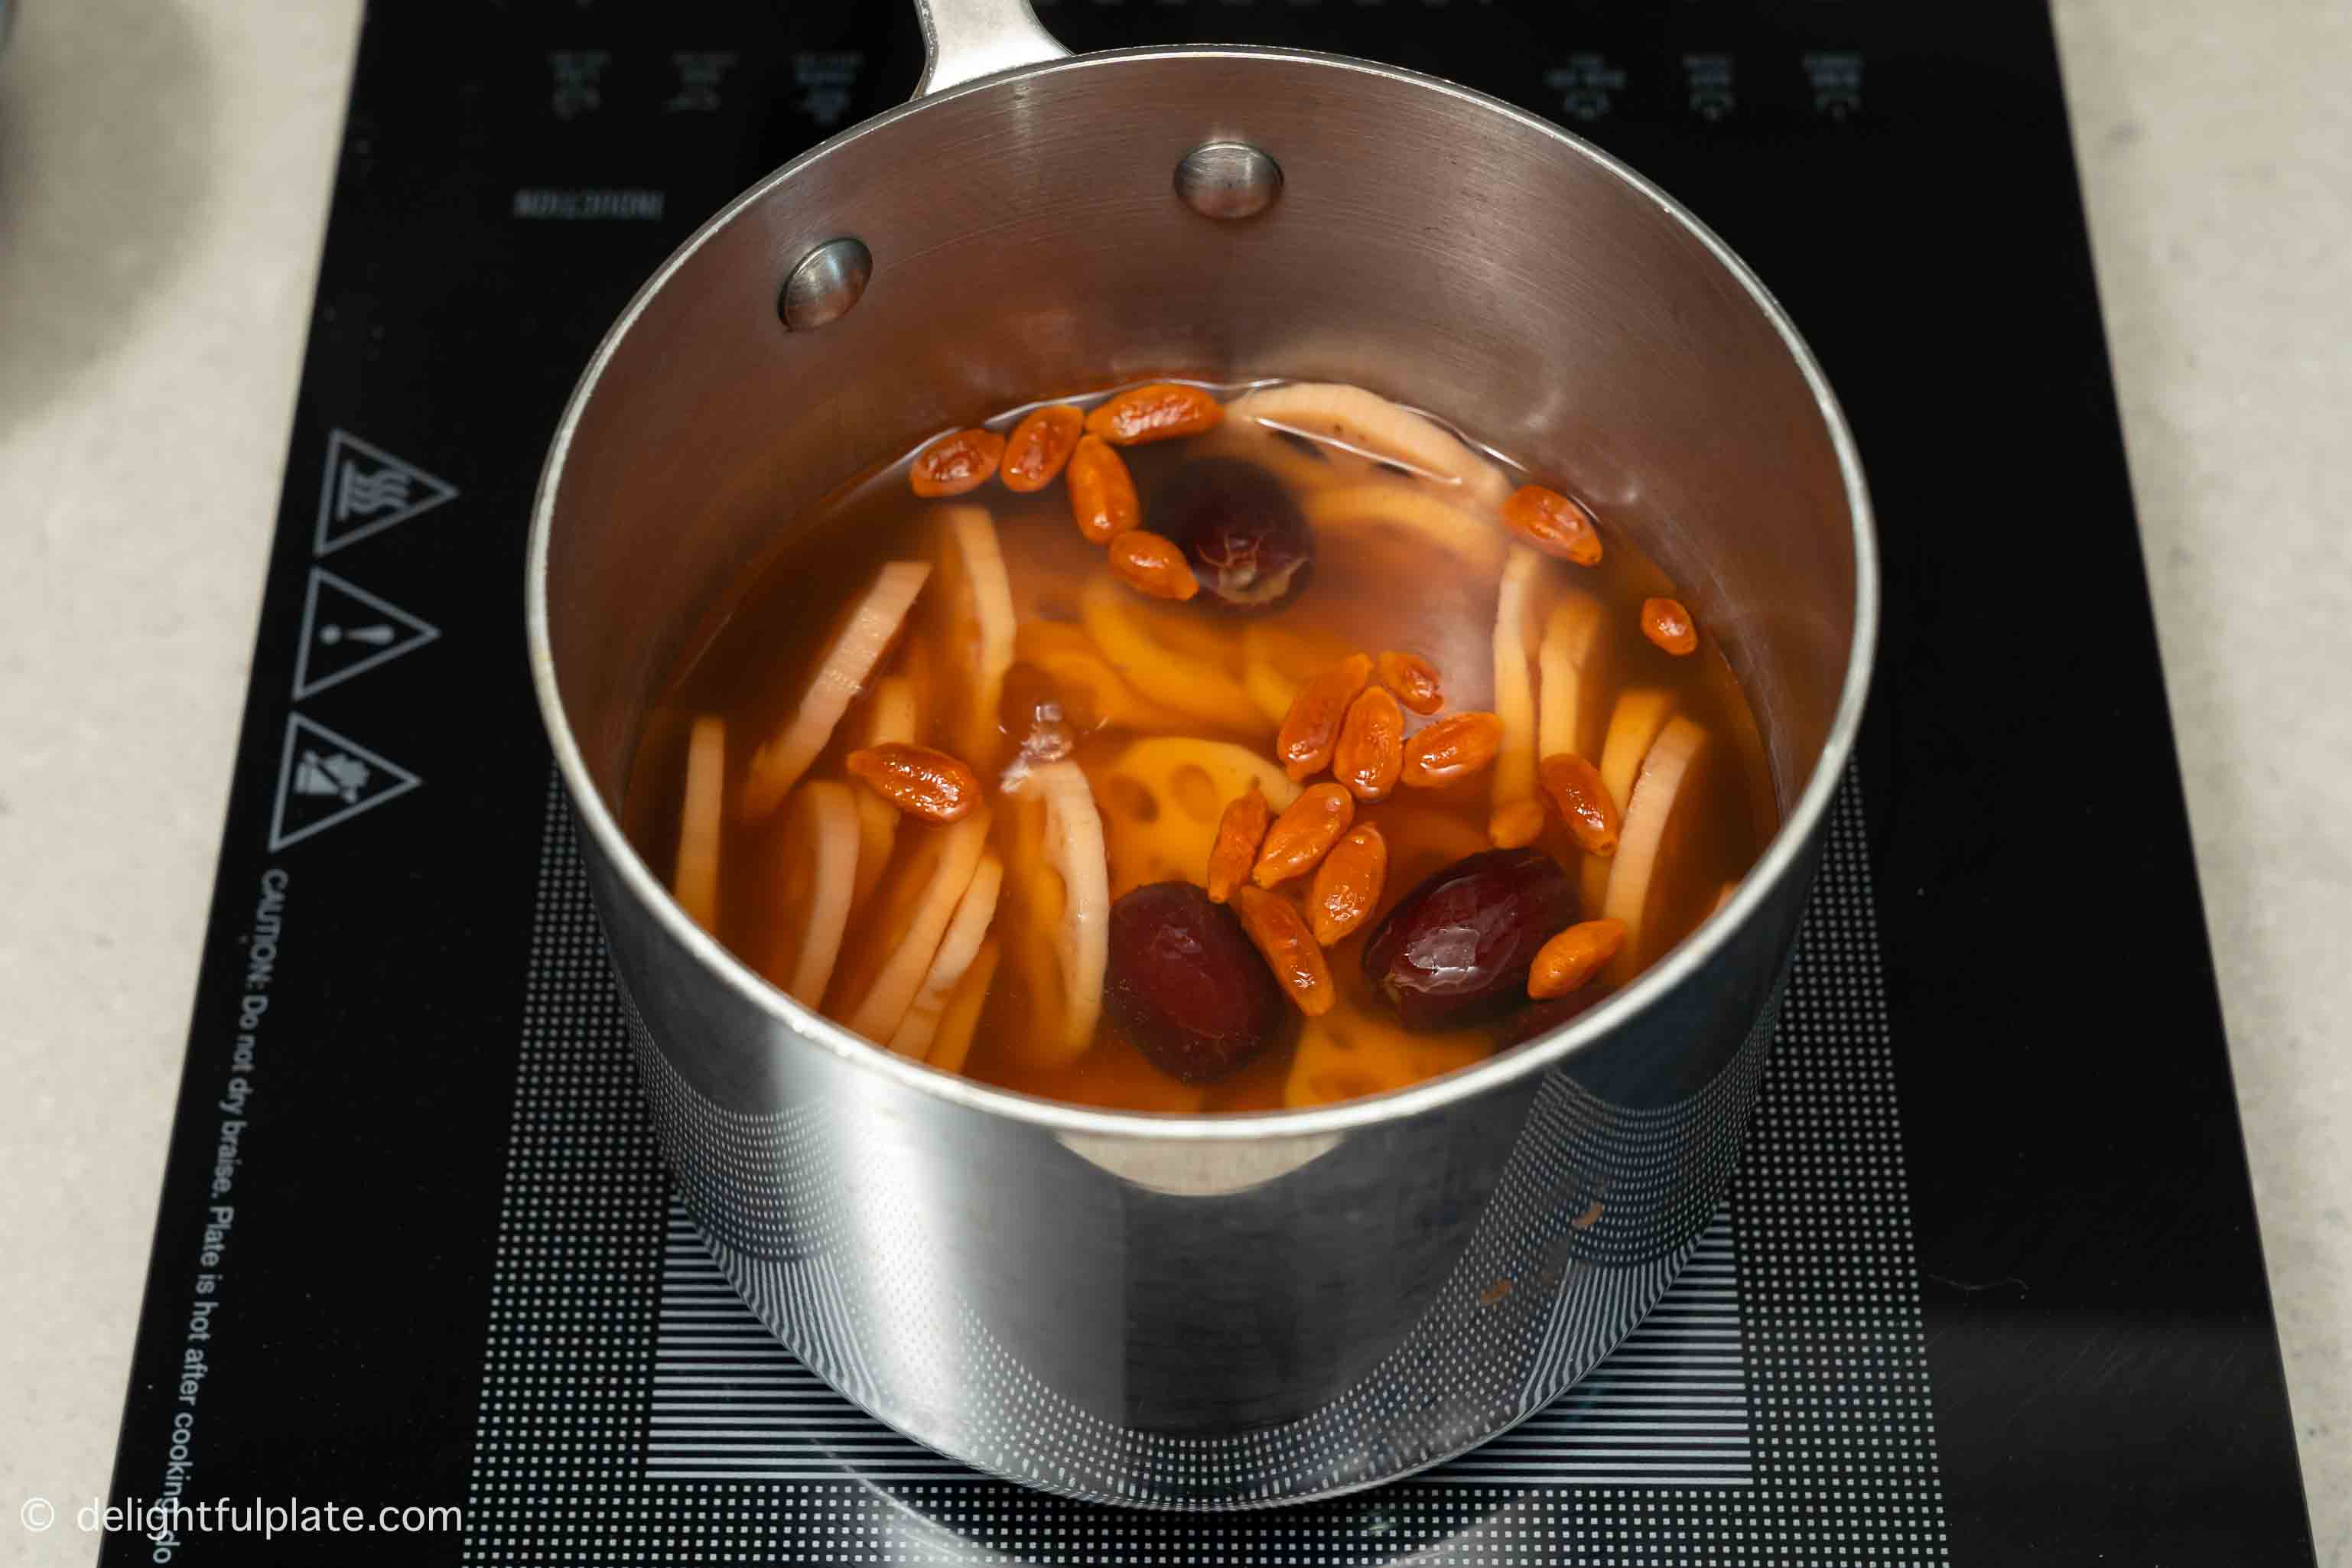 the pot of lotus root soup with goji berries and red dates on the cooktop.